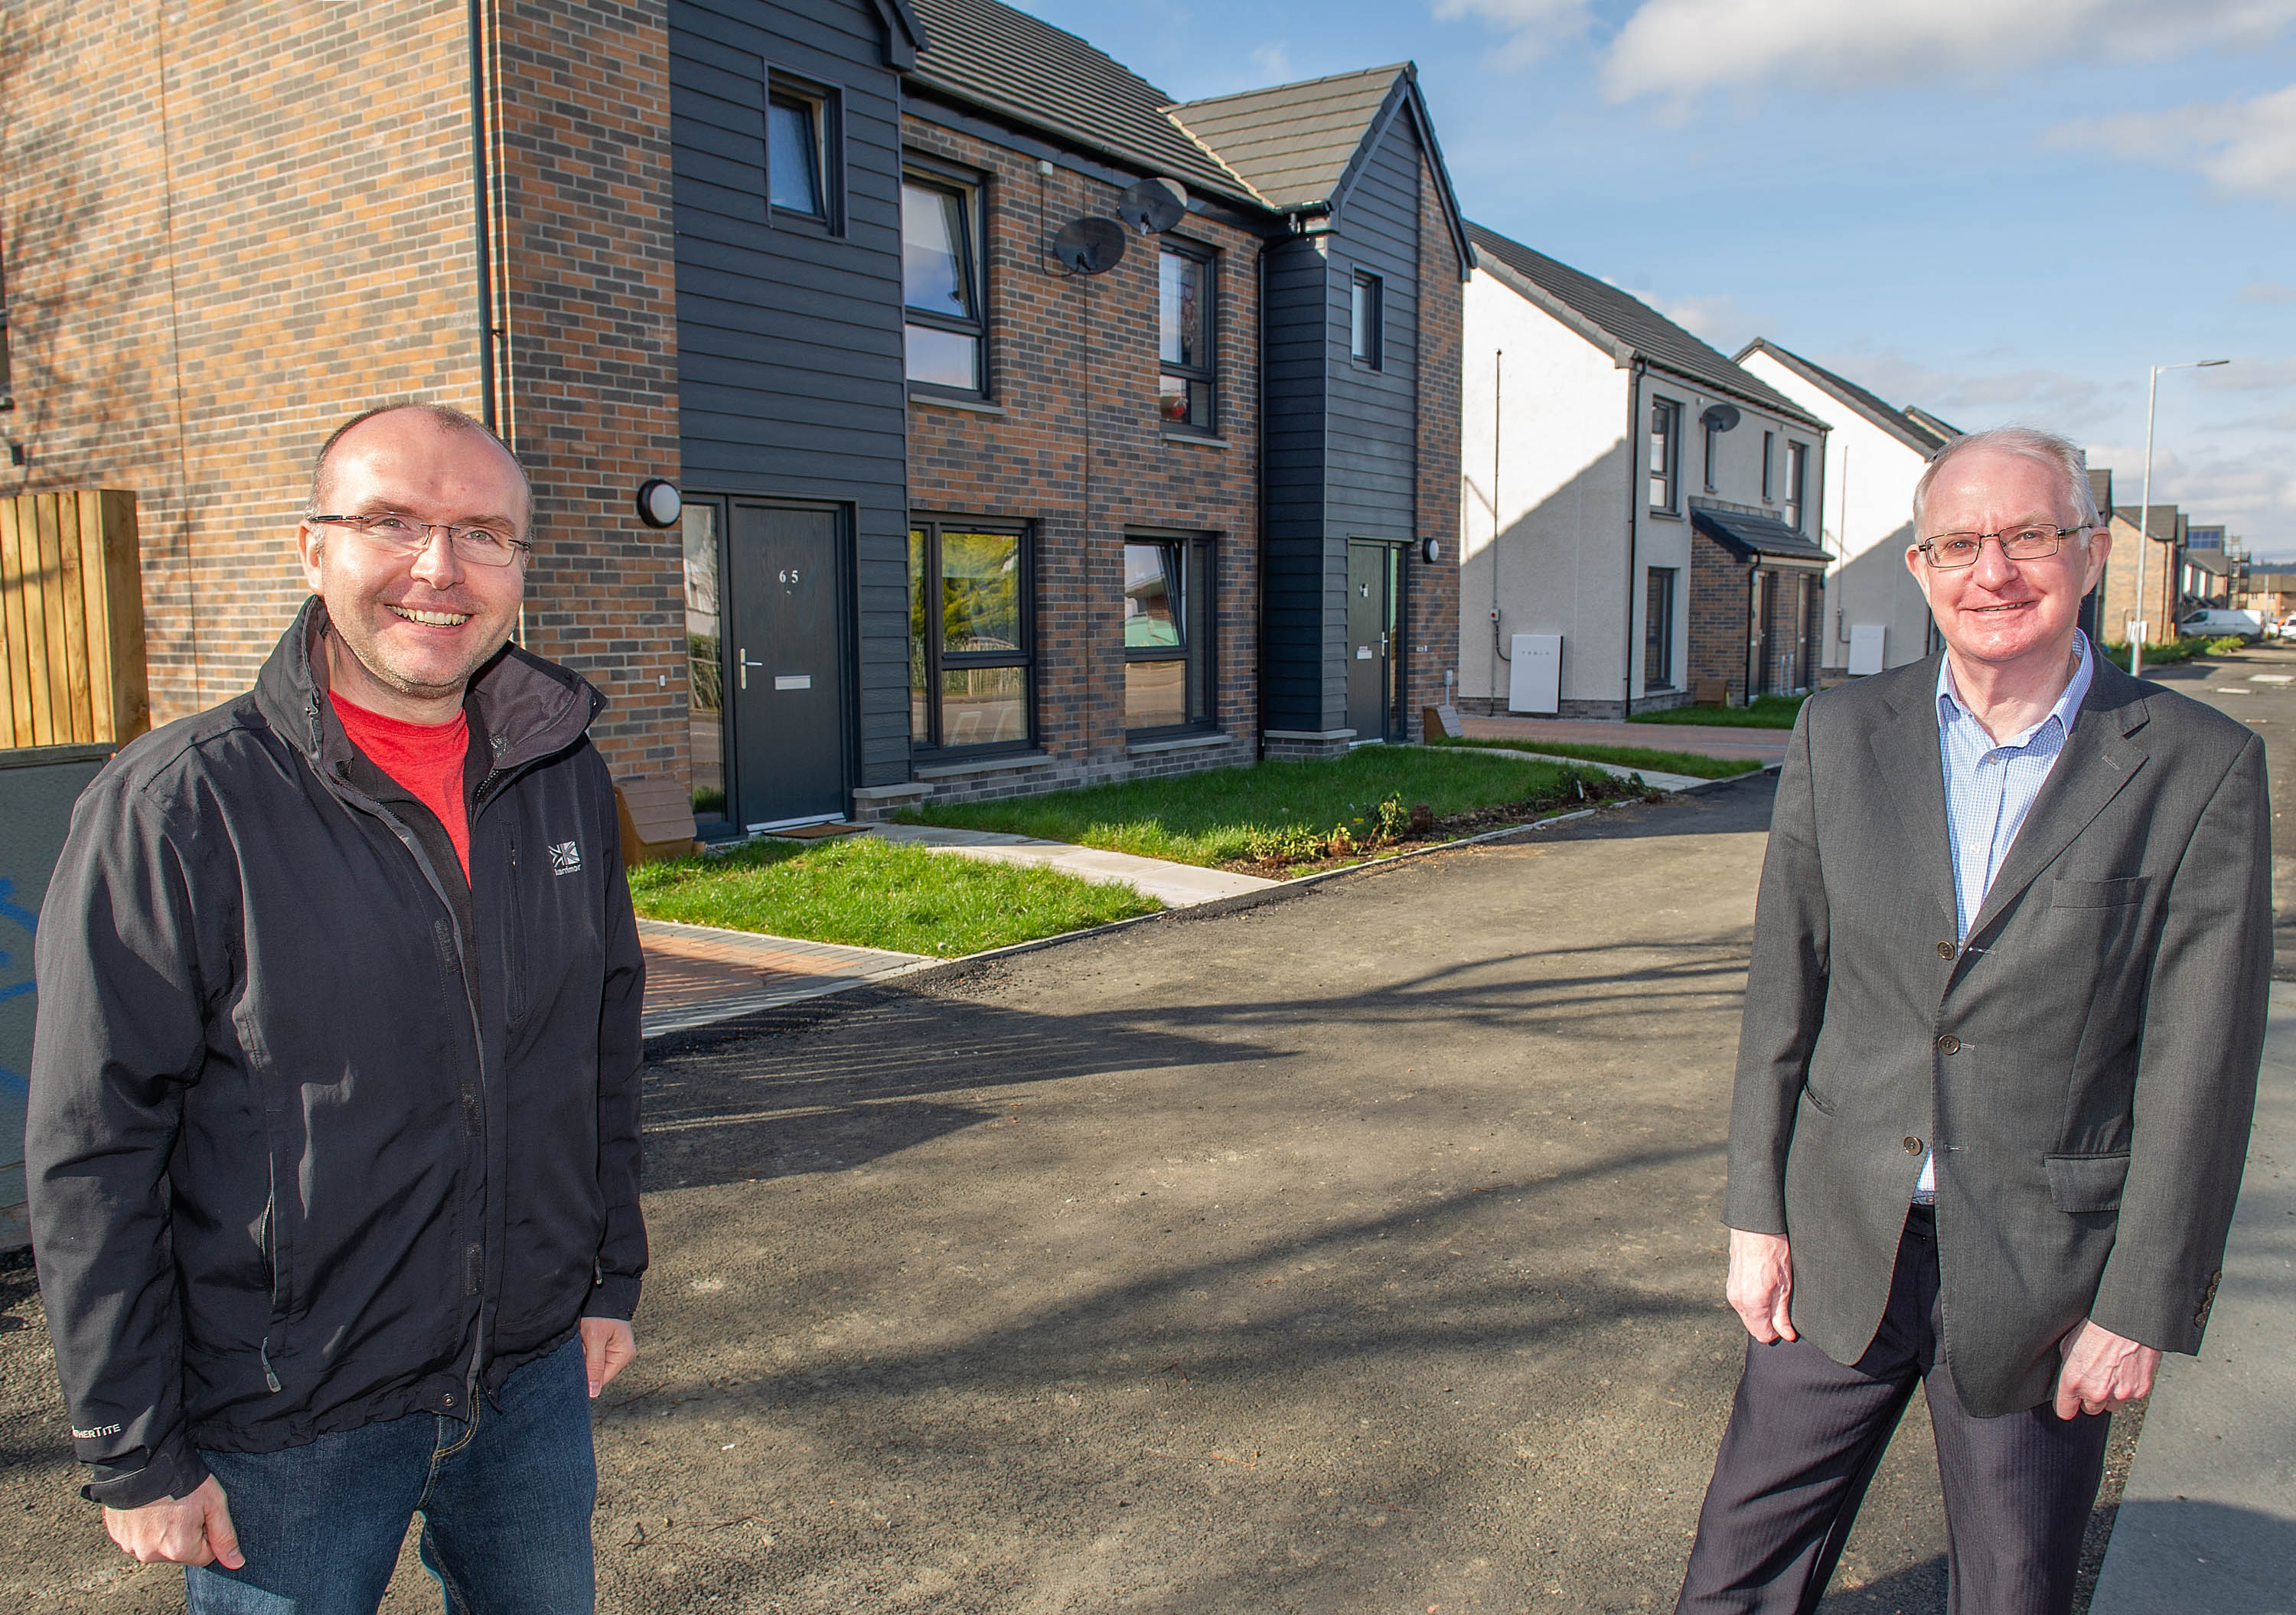 New council homes marks another milestone in regeneration of Raploch